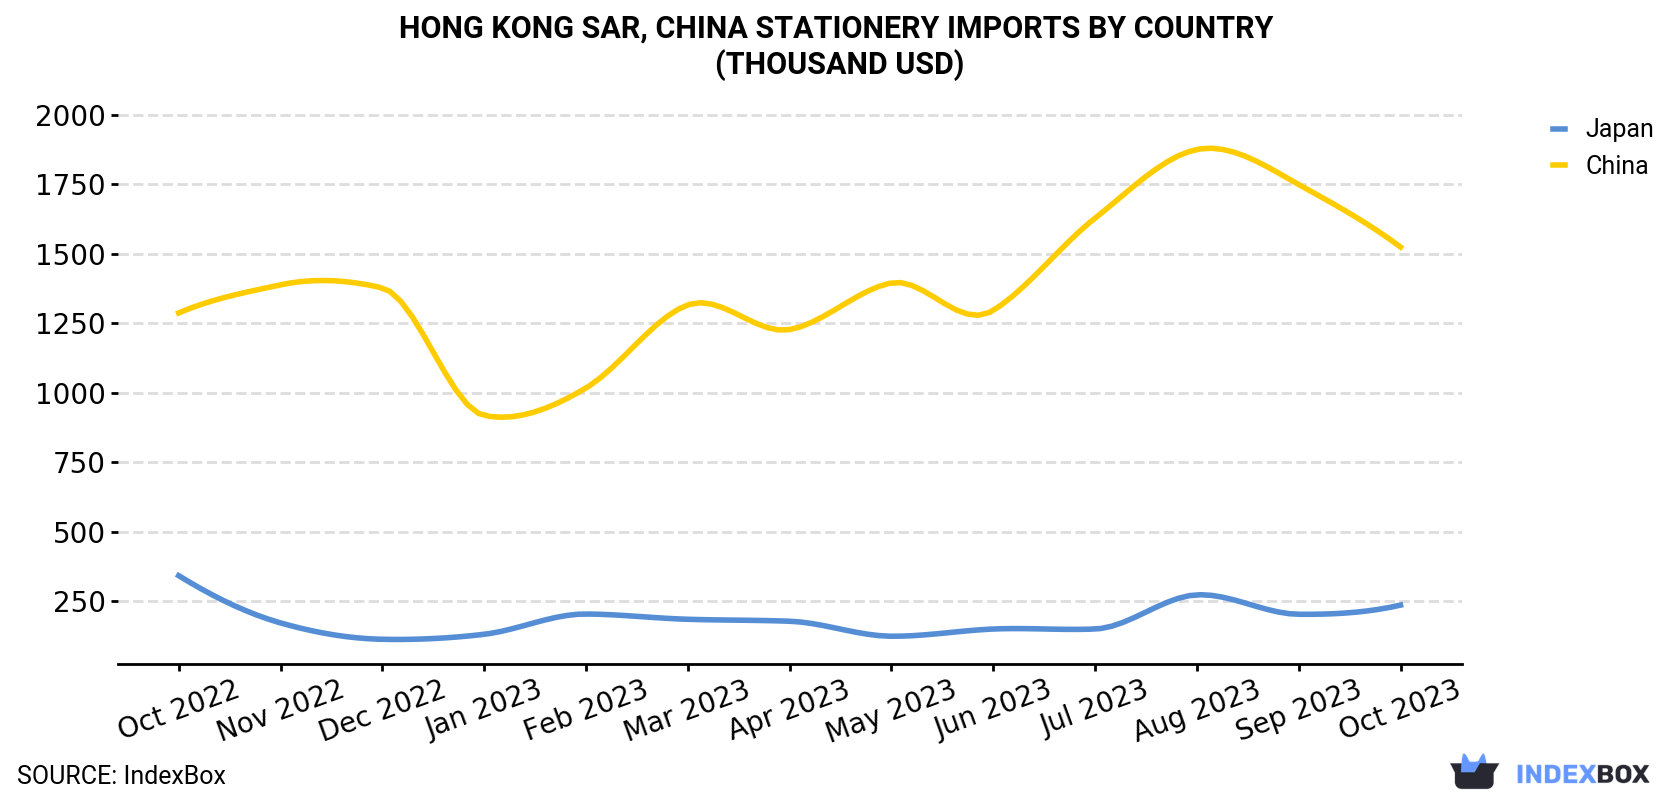 Hong Kong Stationery Imports By Country (Thousand USD)